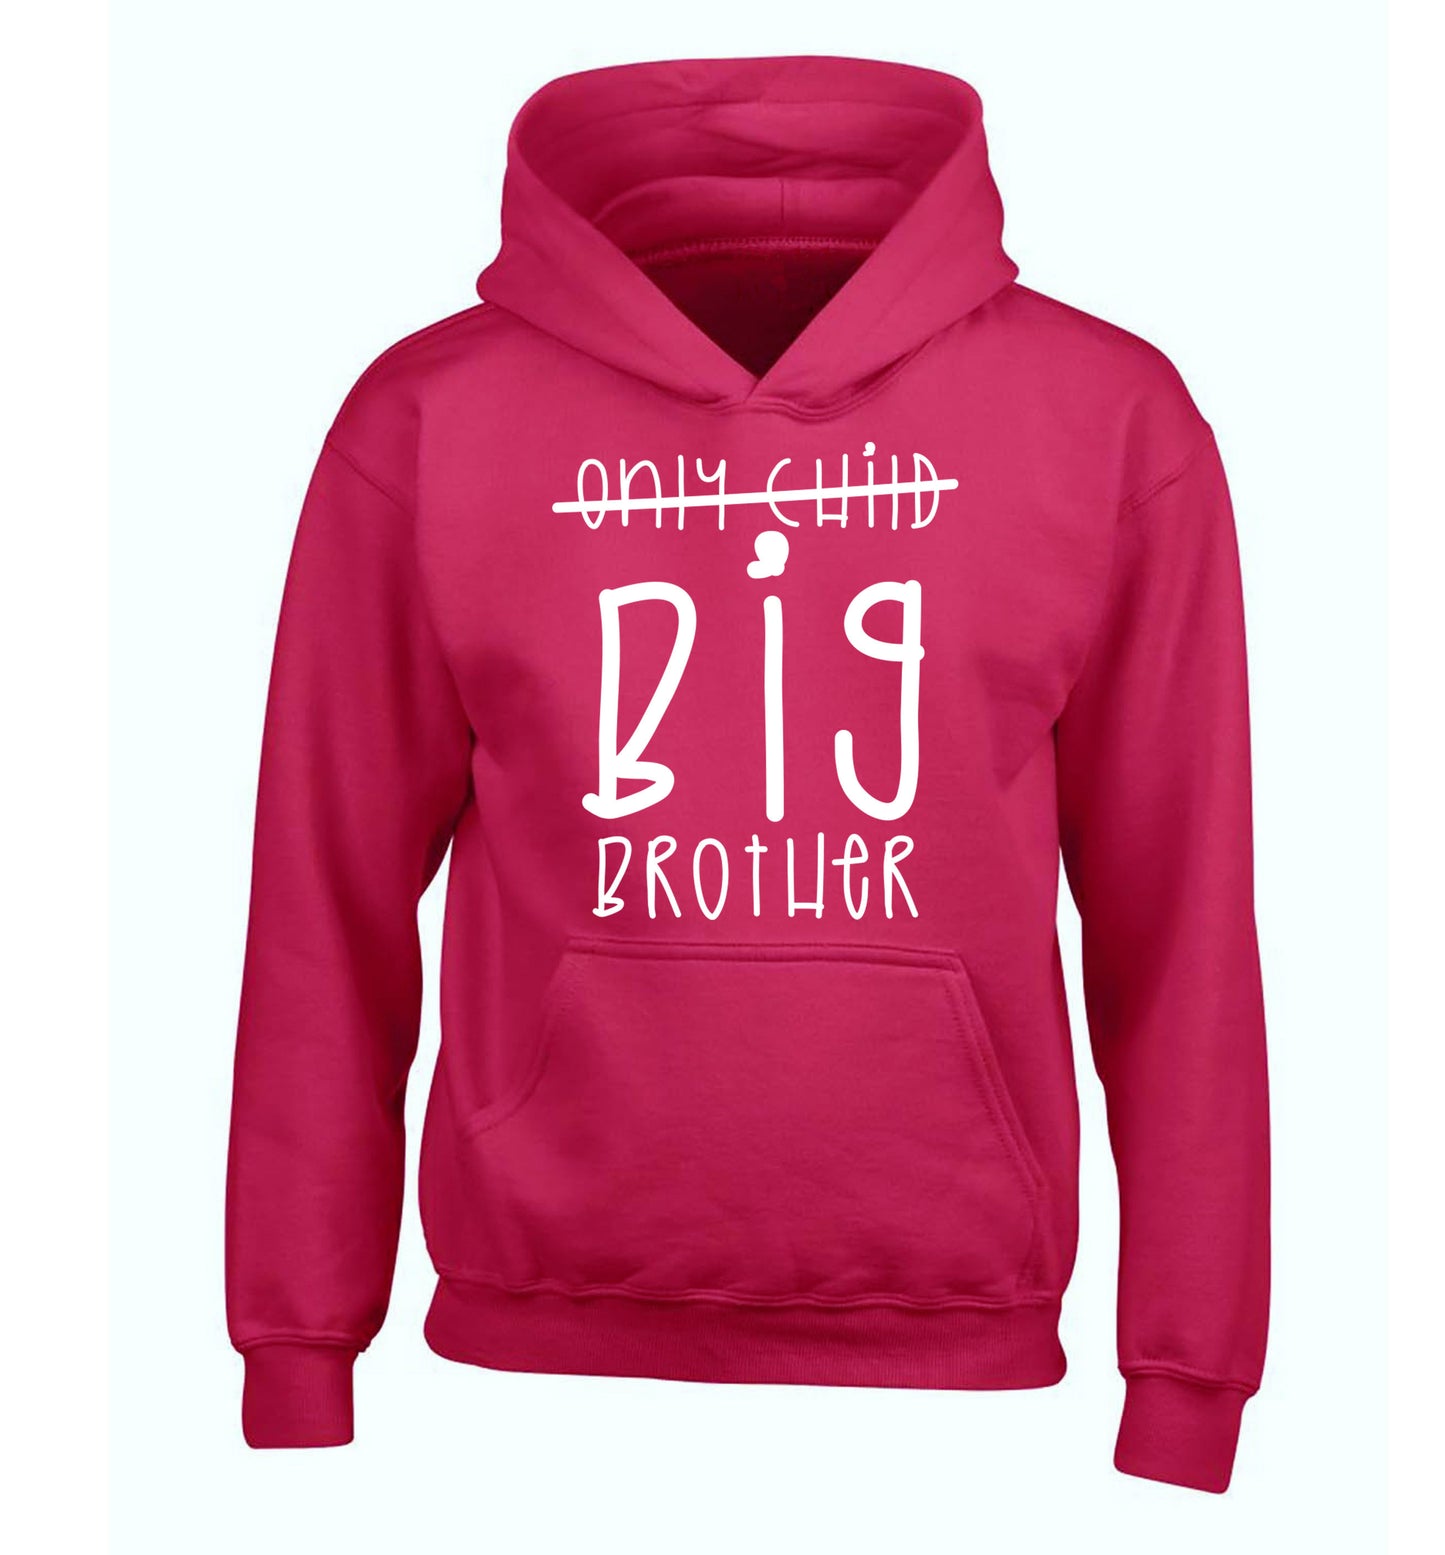 Only child big brother children's pink hoodie 12-14 Years